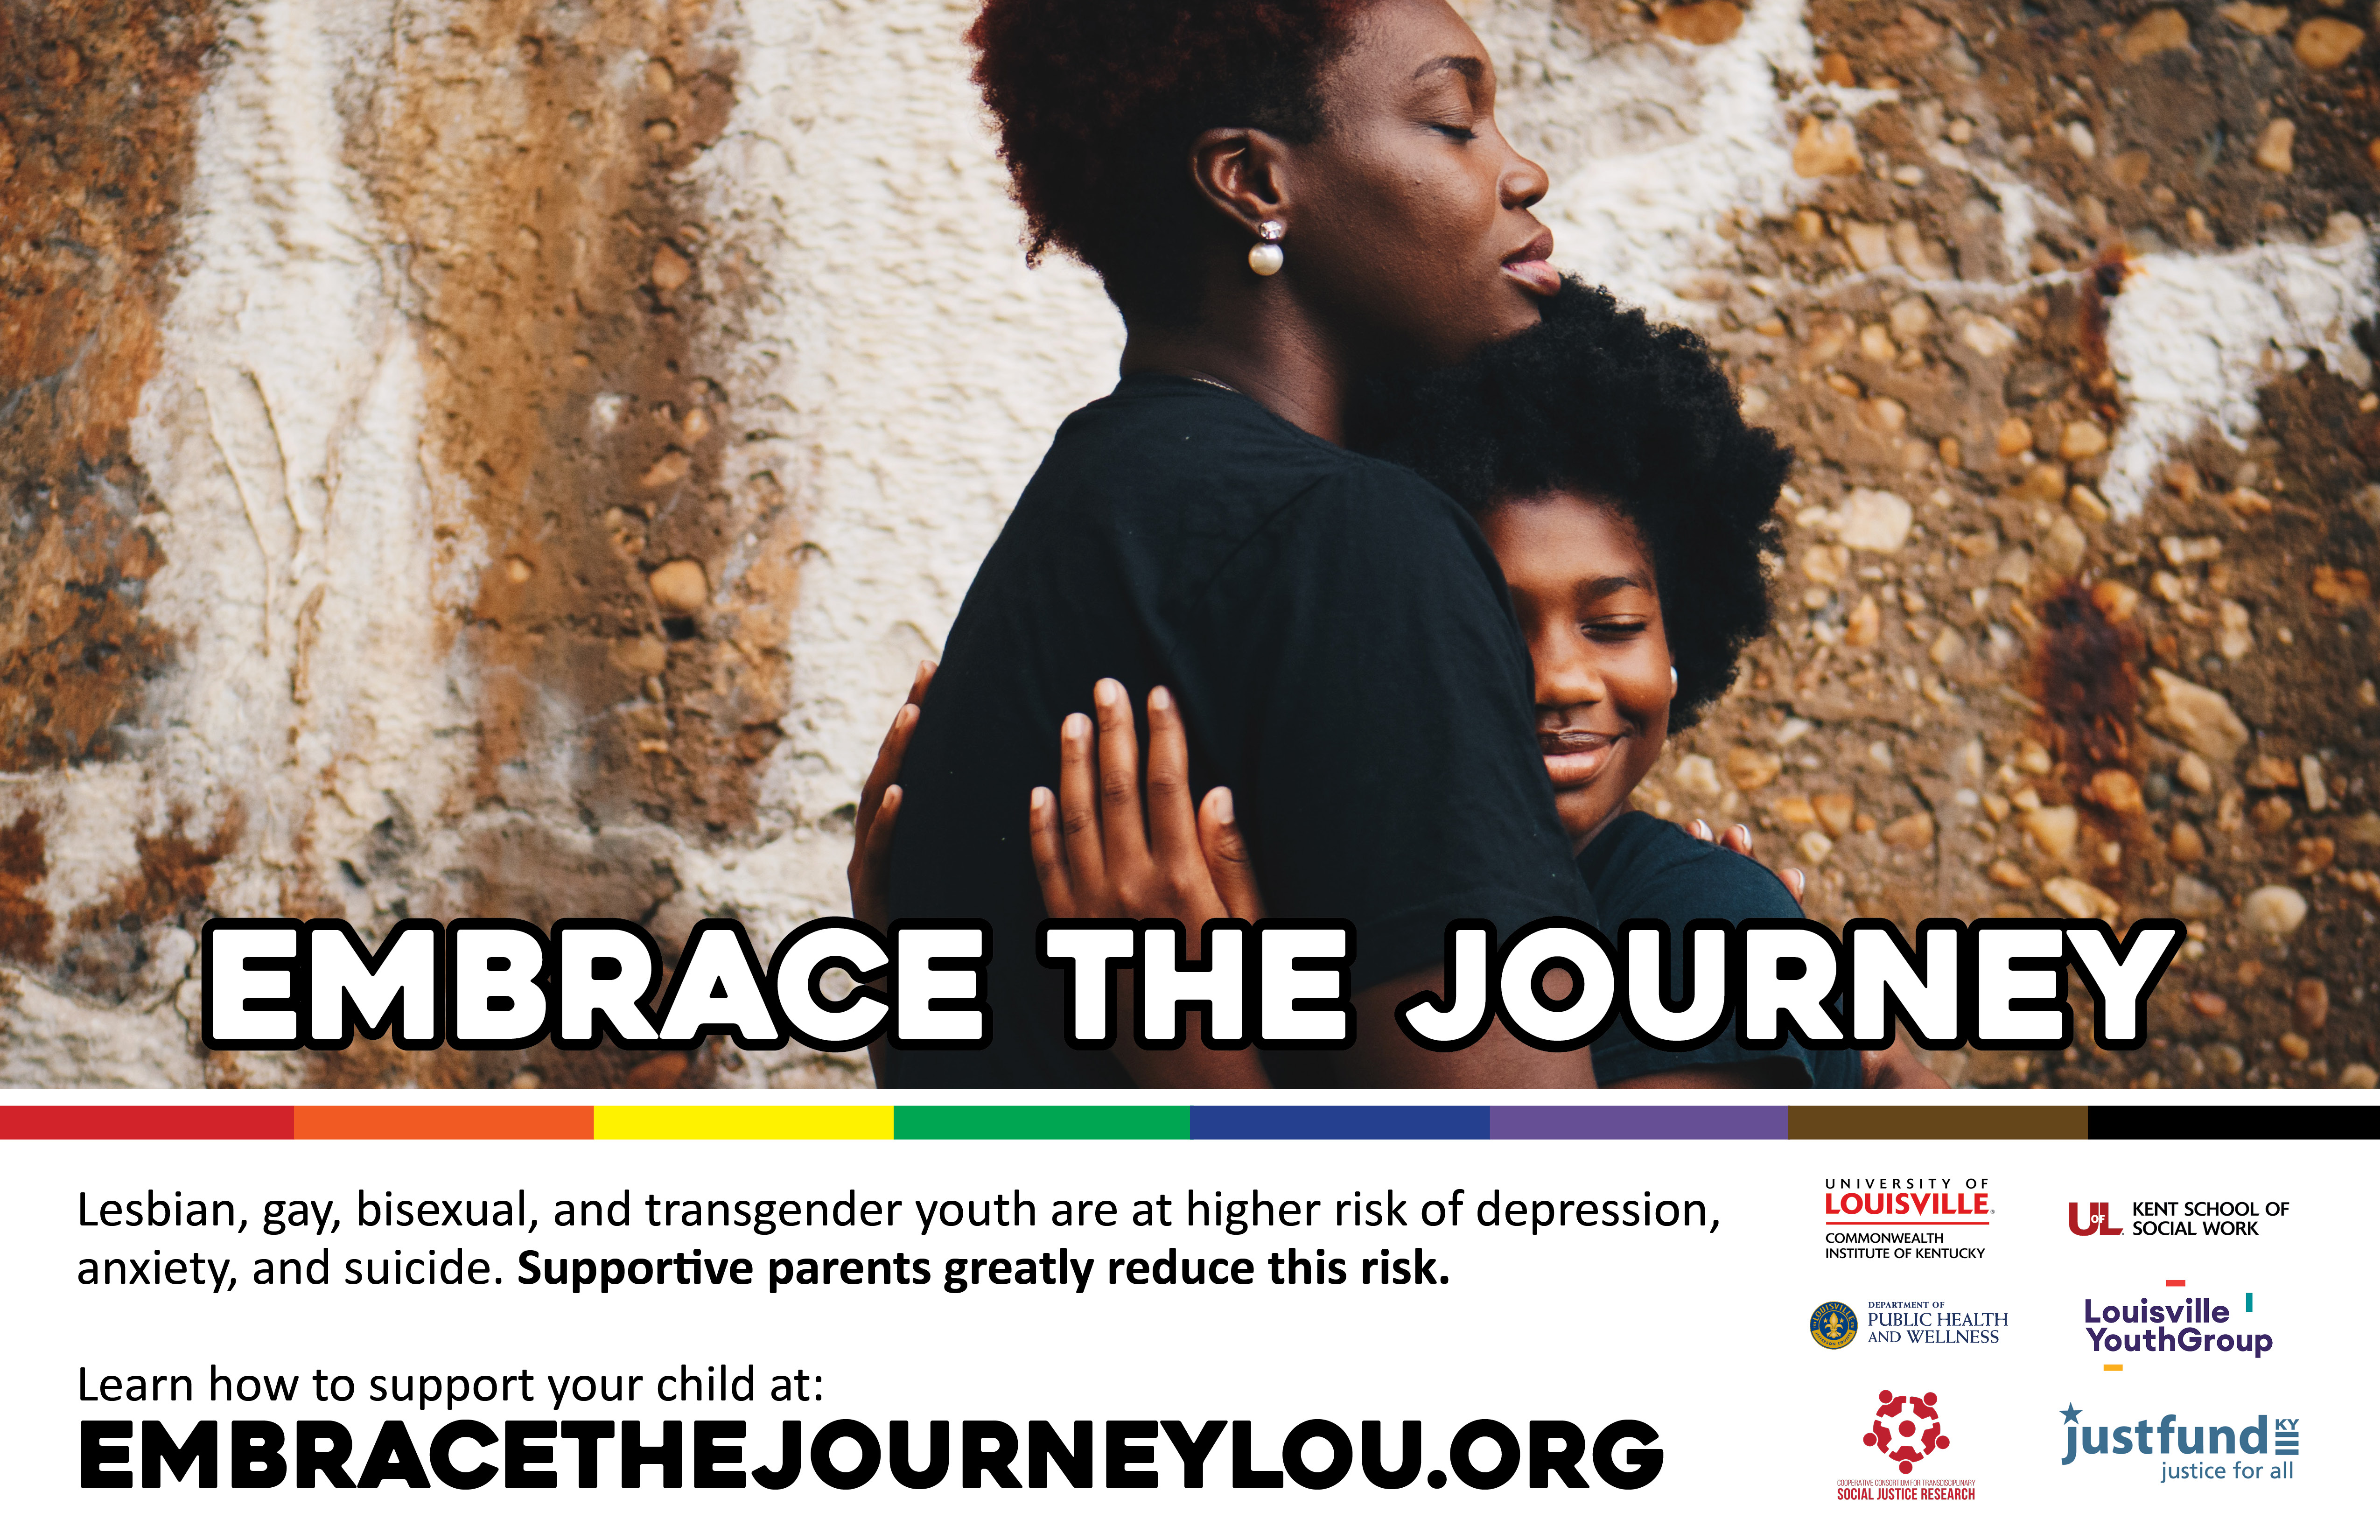 Embrace the Journey campaign